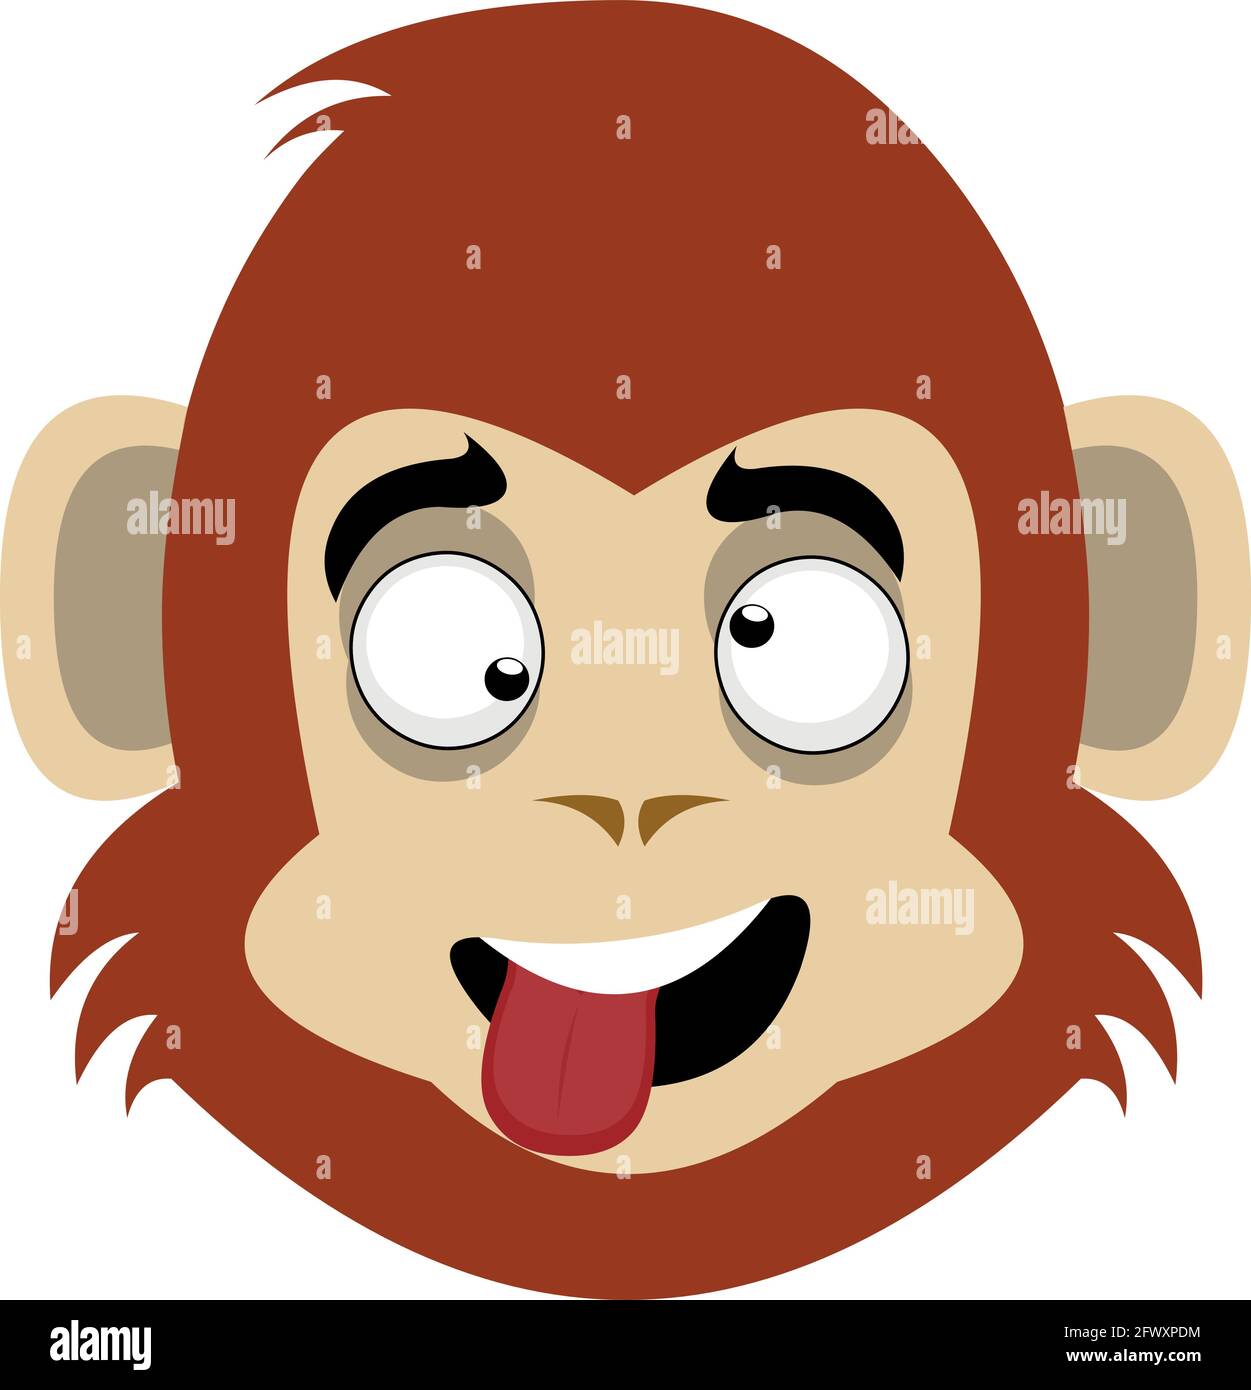 Vector emoticon illustration of a cartoon monkey's face with a crazy and funny expression Stock Vector